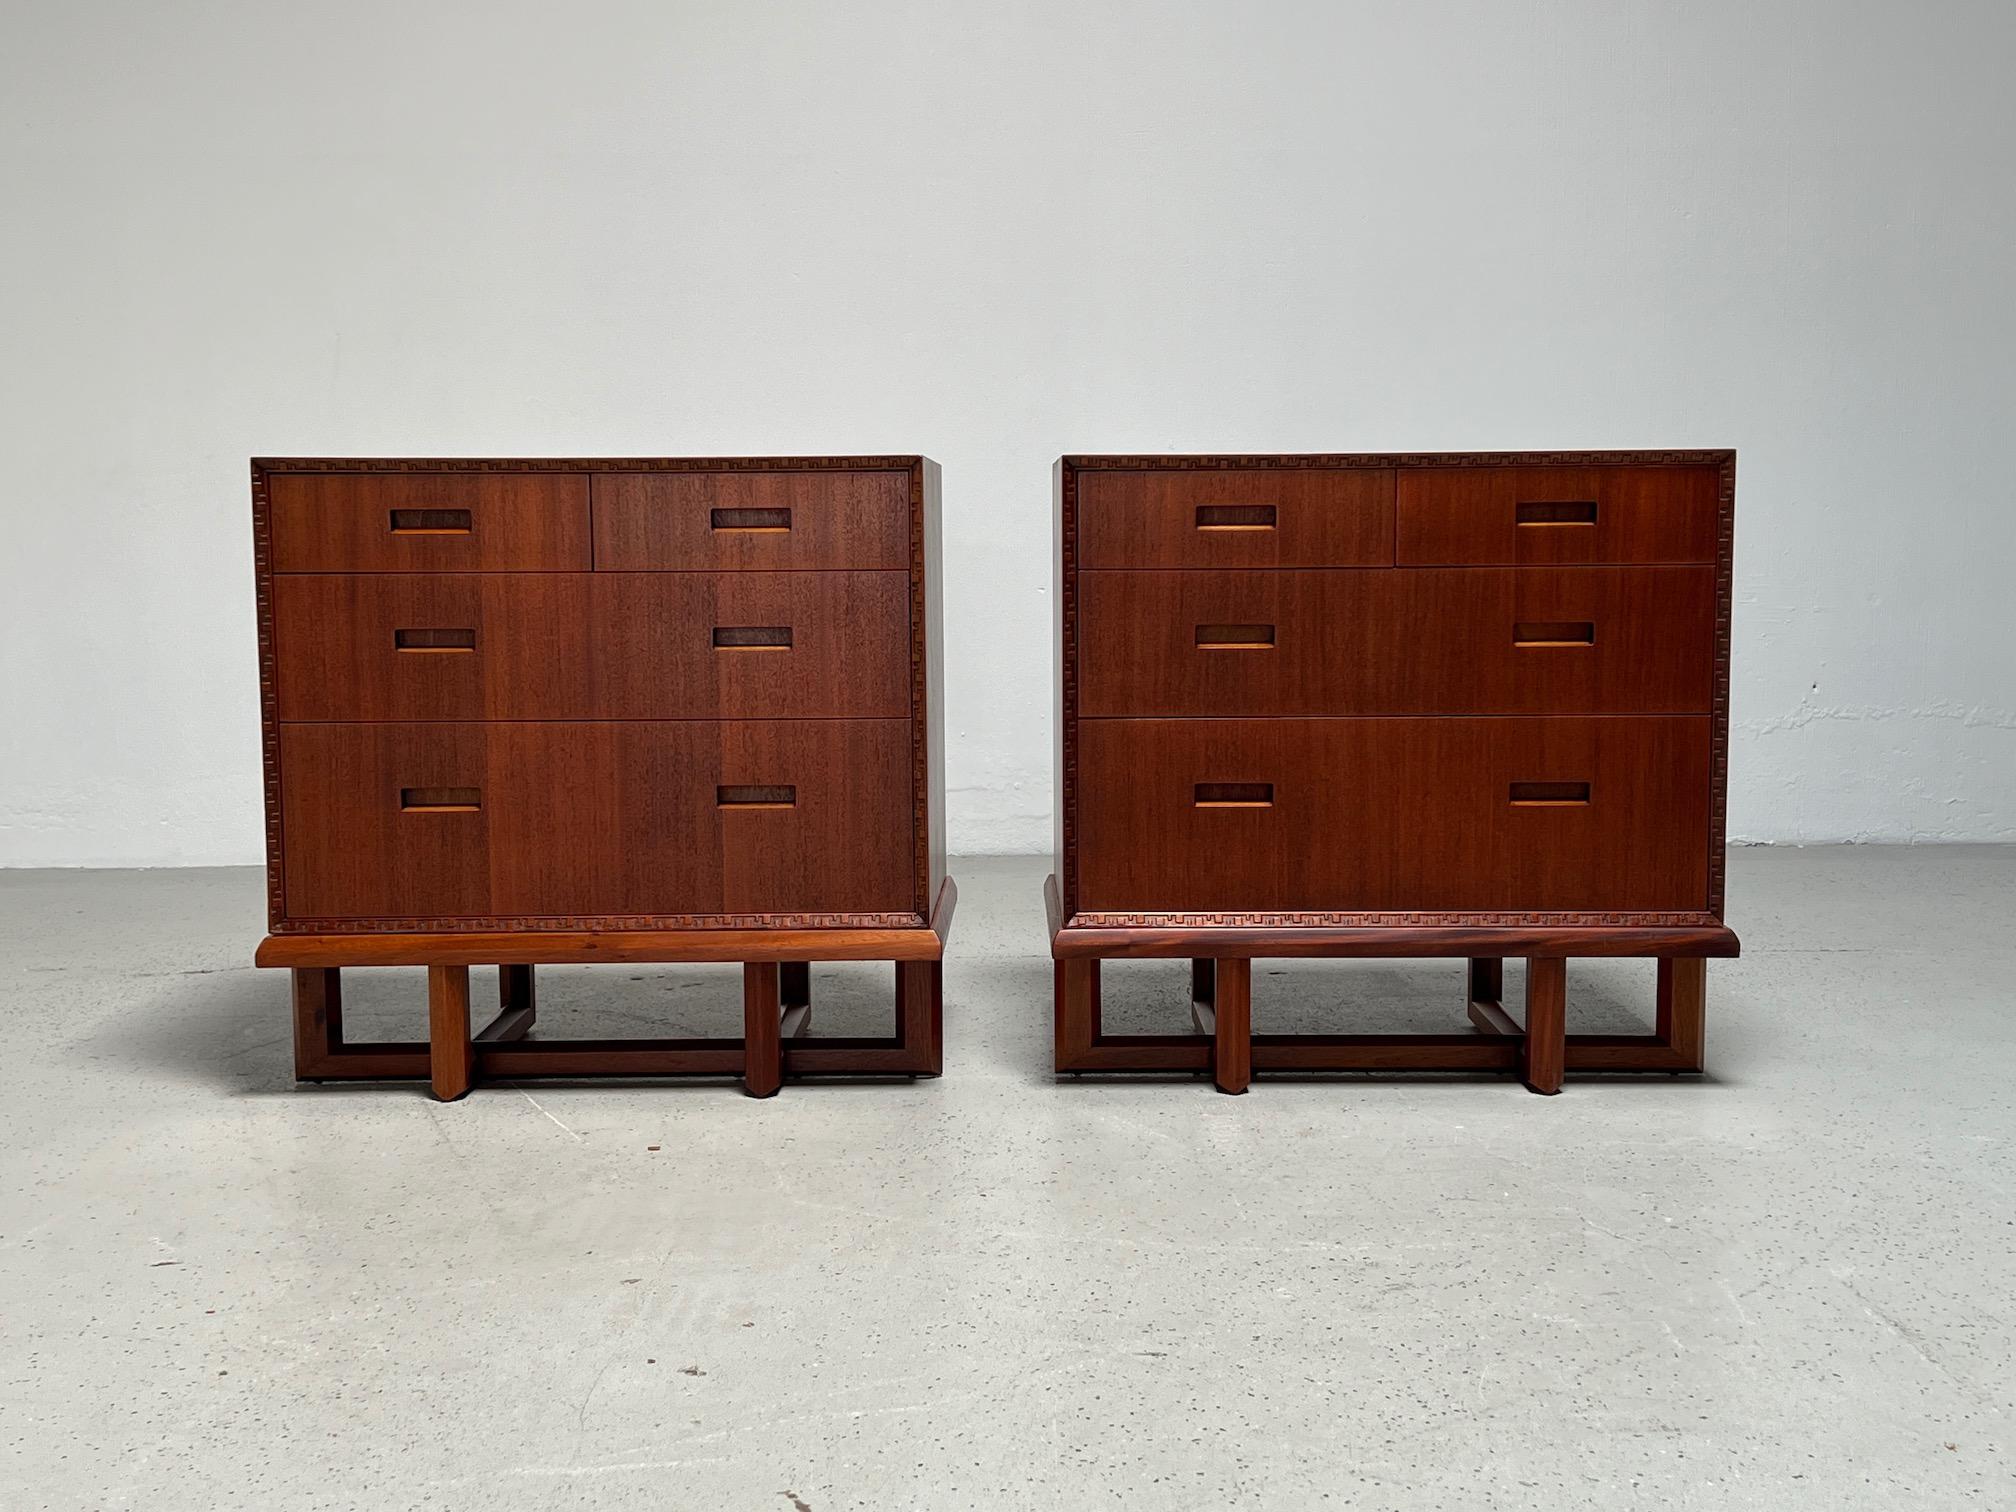 A rare pair of mahogany chests of drawers on stands designed by Frank Lloyd Wright for Henredon.